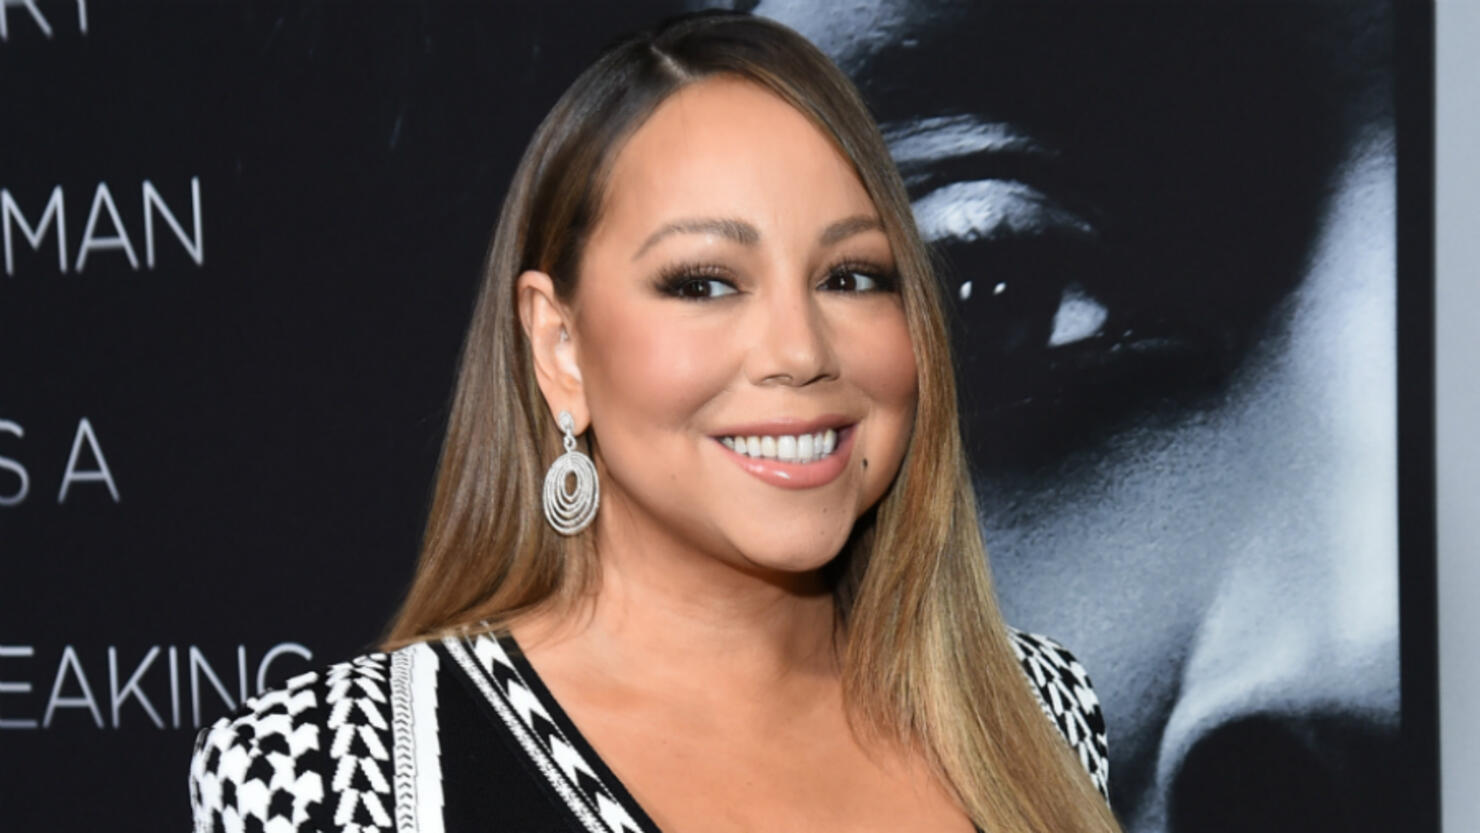 Mariah Carey and Kids Wash Hands to Her Collaboration with O.D.B.